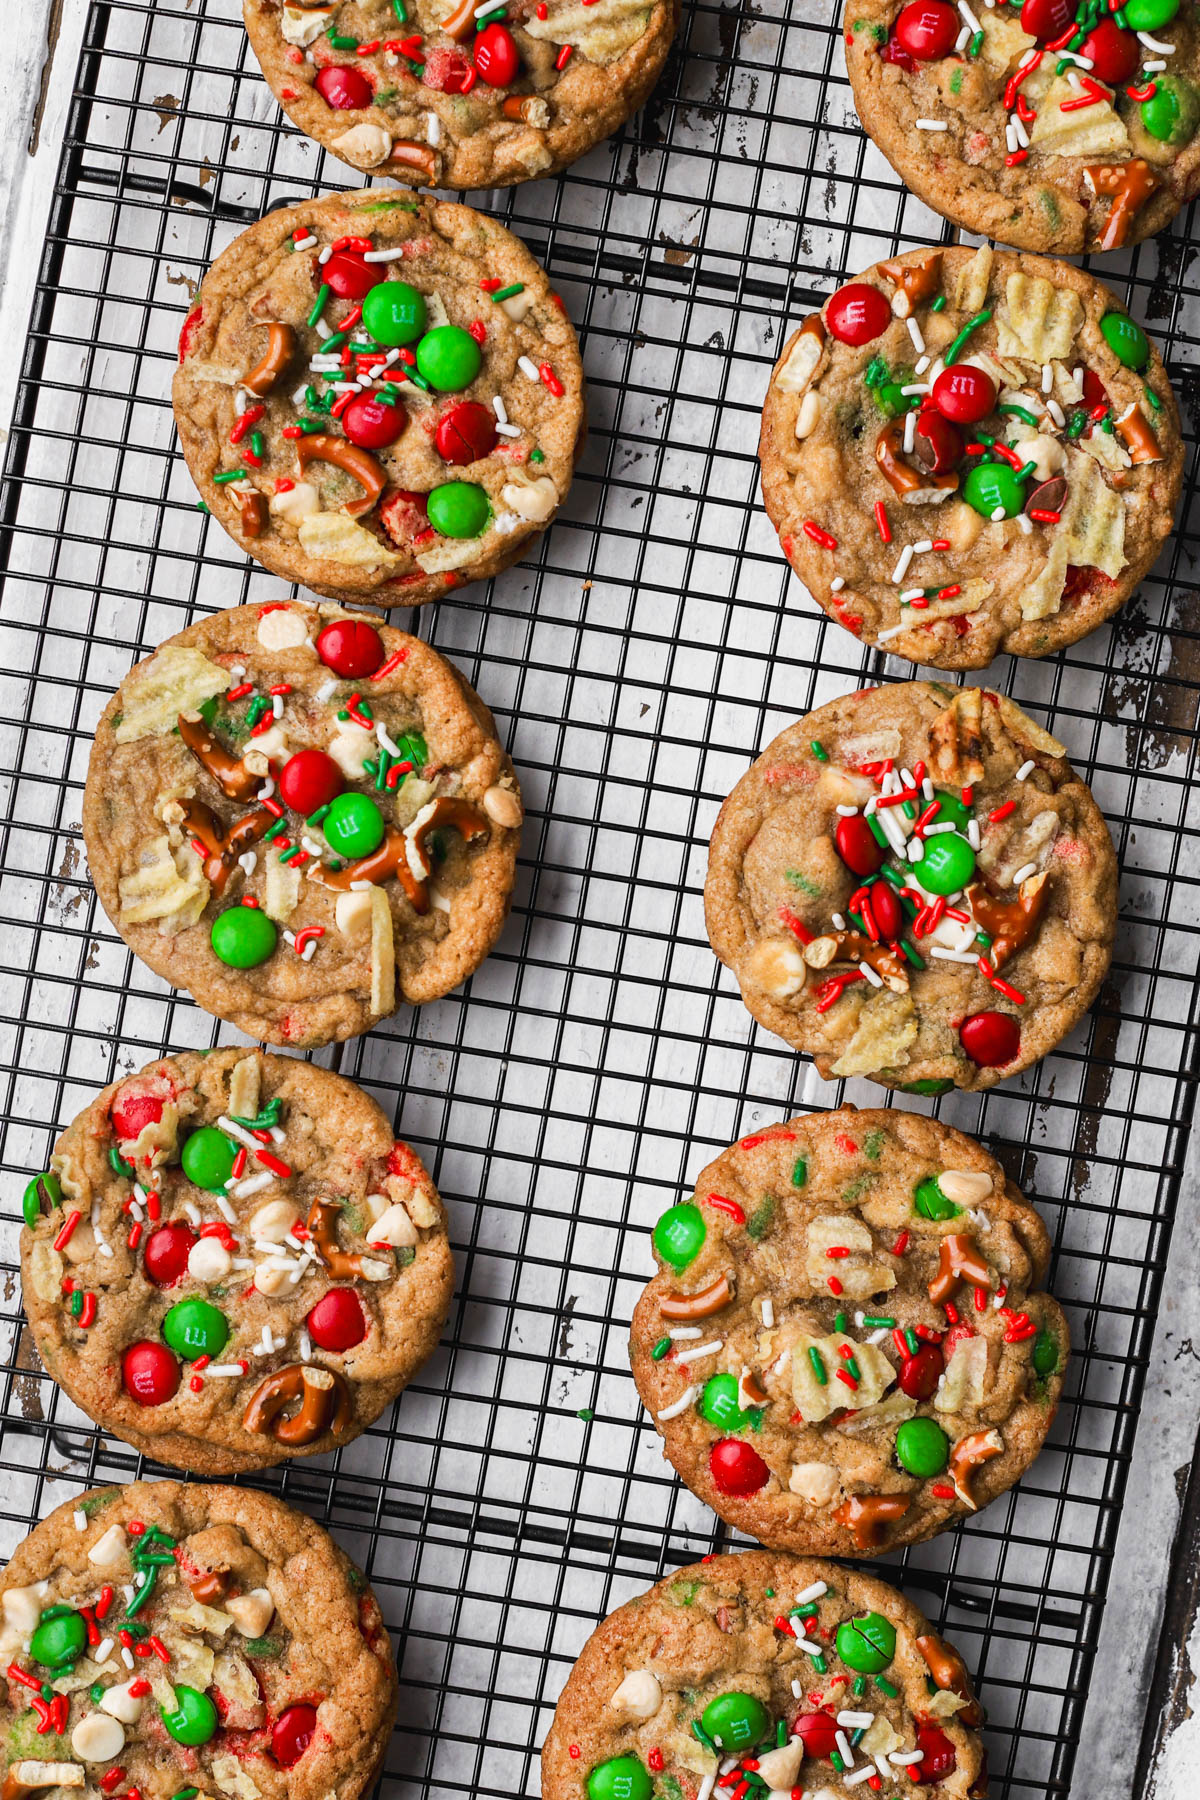 Baked kitchen sink Christmas cookies with pretzels, potato chips, white chocolate and M&M's. 